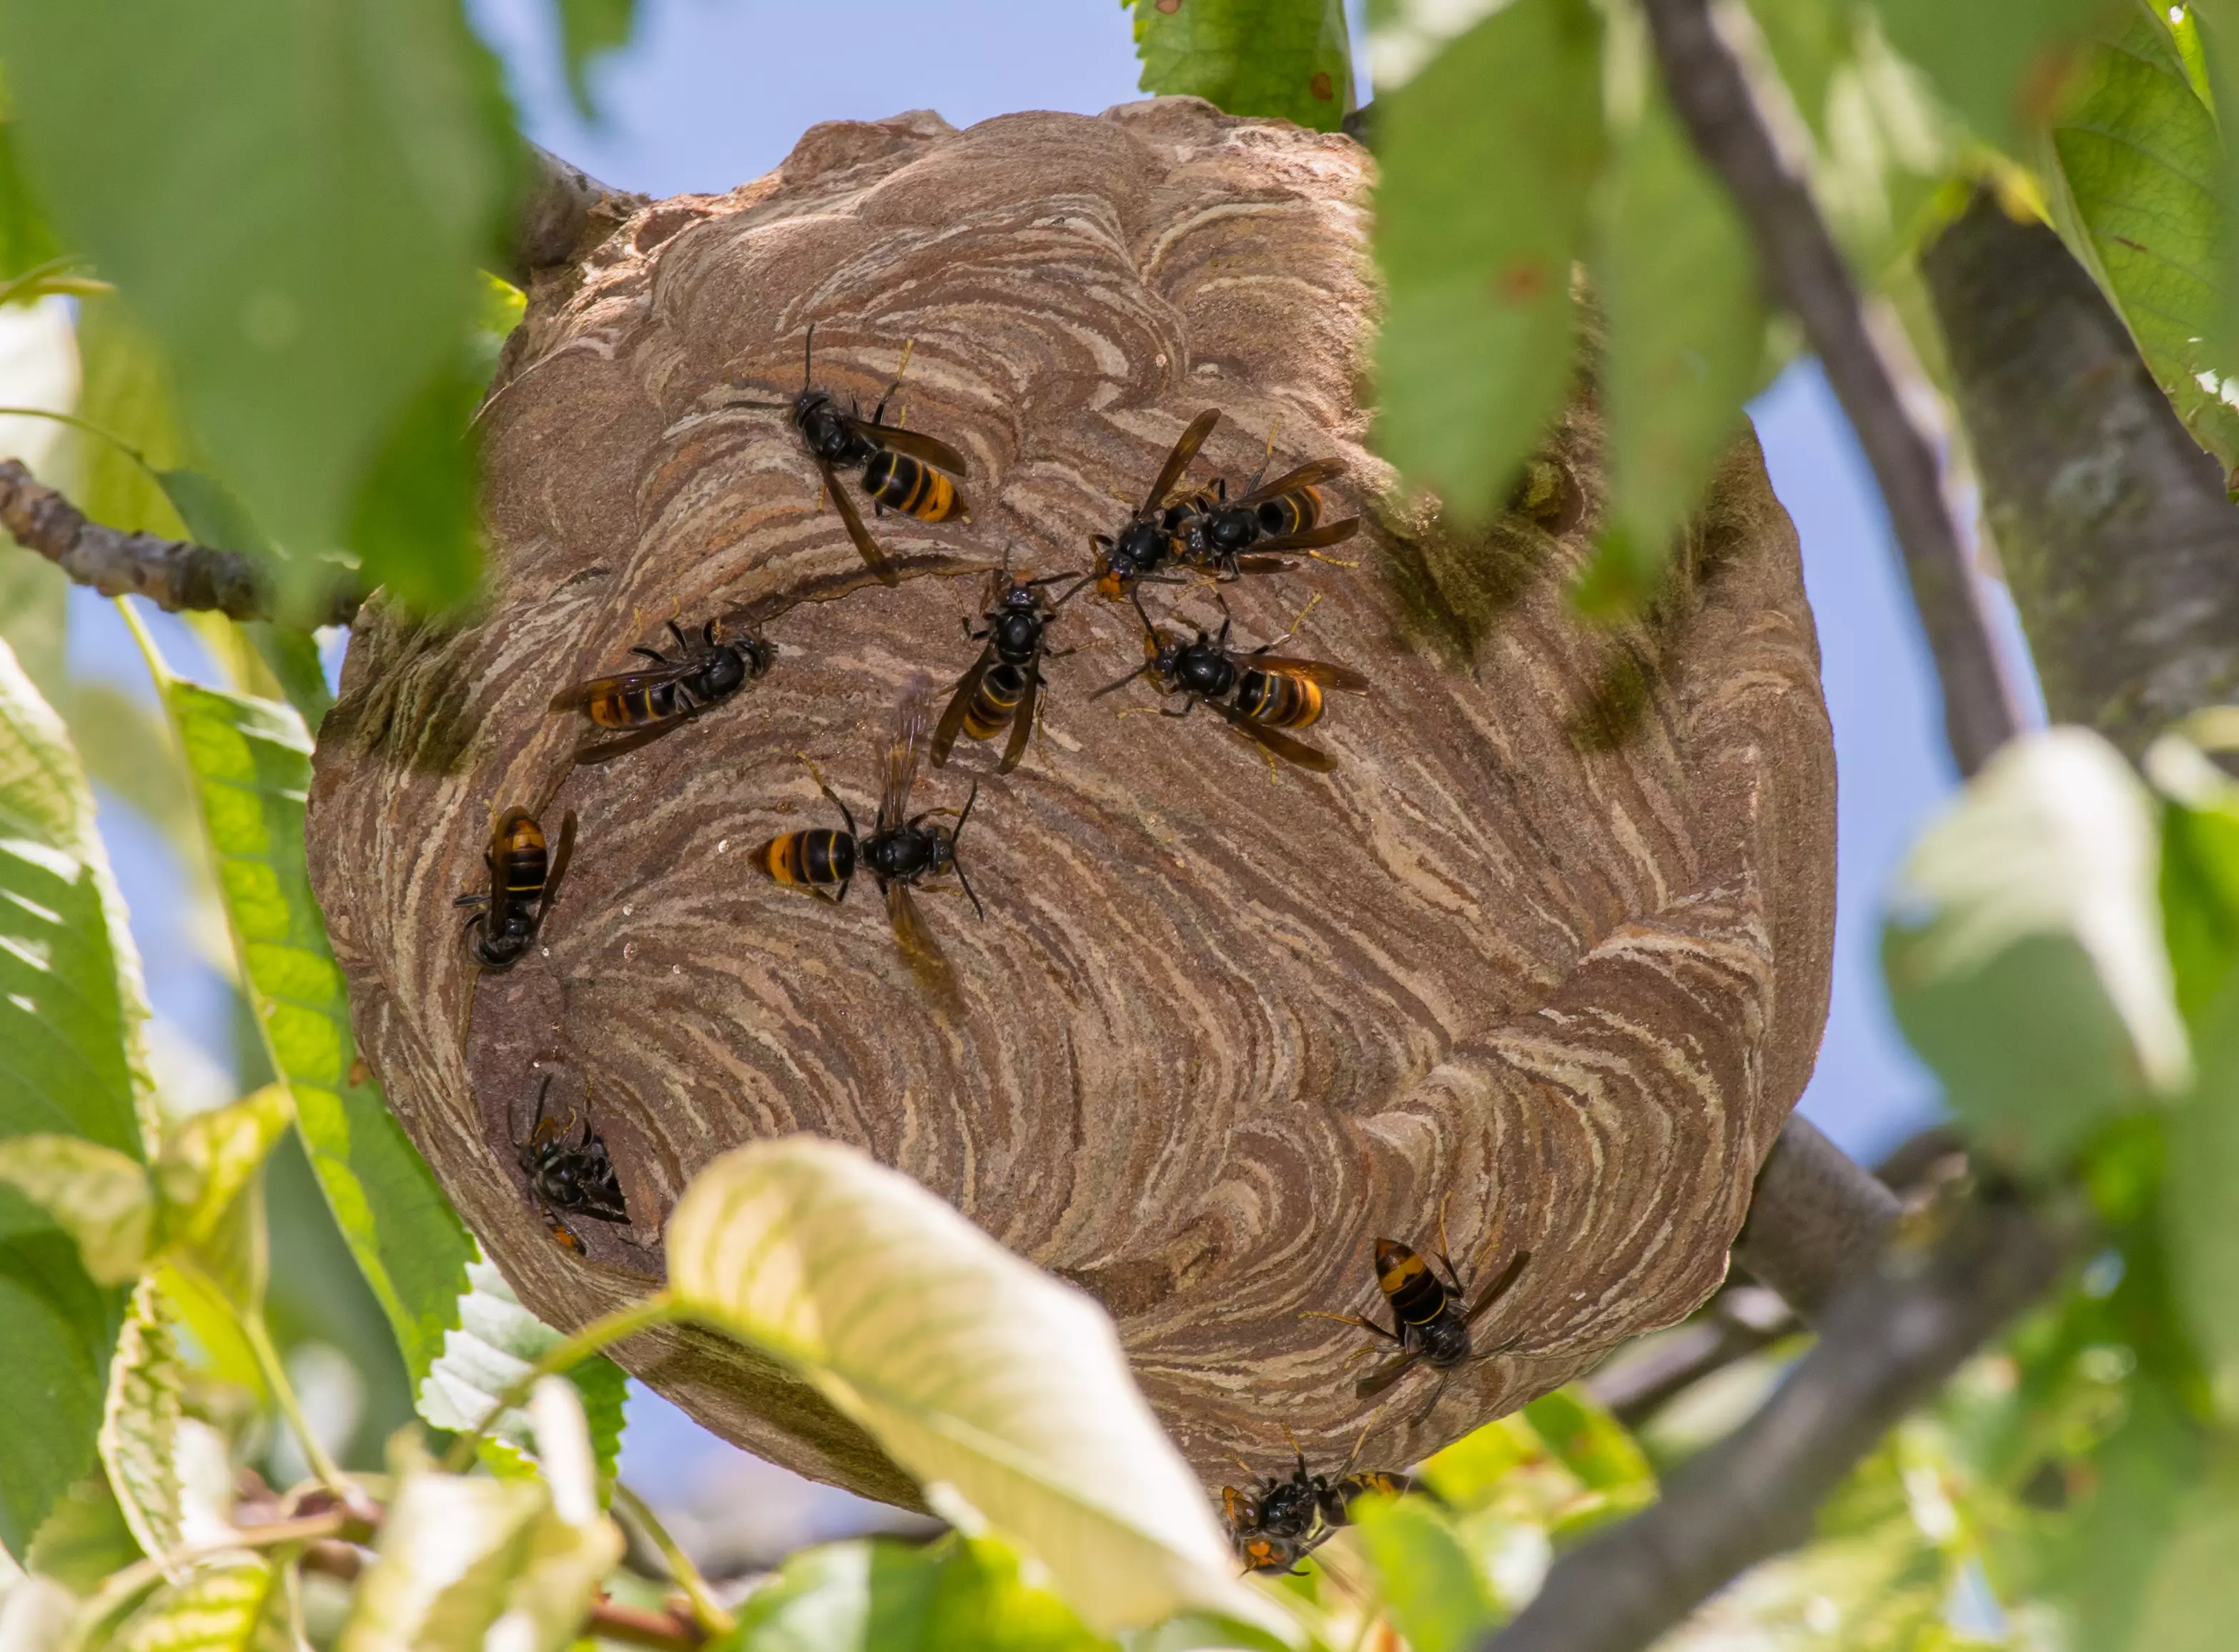 A bee-keeping expert has been experimenting with flavours to lure the critters out of their nests.